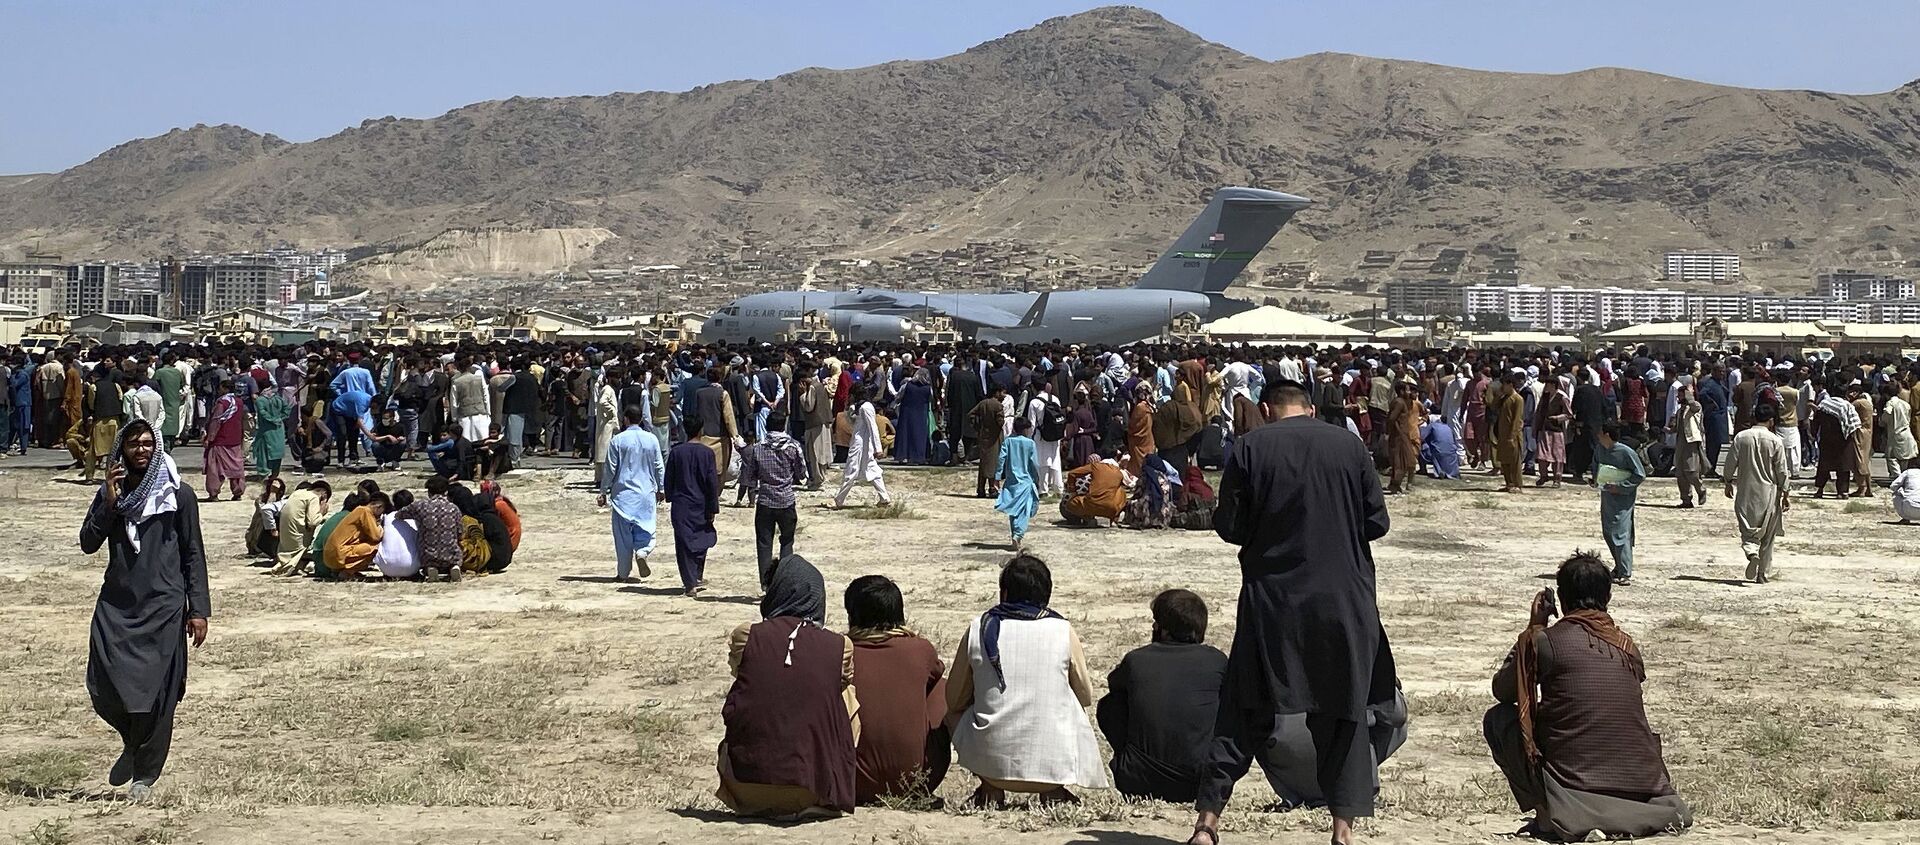 Hundreds of people gather near a U.S. Air Force C-17 transport plane at a perimeter at the international airport in Kabul, Afghanistan, Monday, Aug. 16, 2021 - Sputnik International, 1920, 18.08.2021